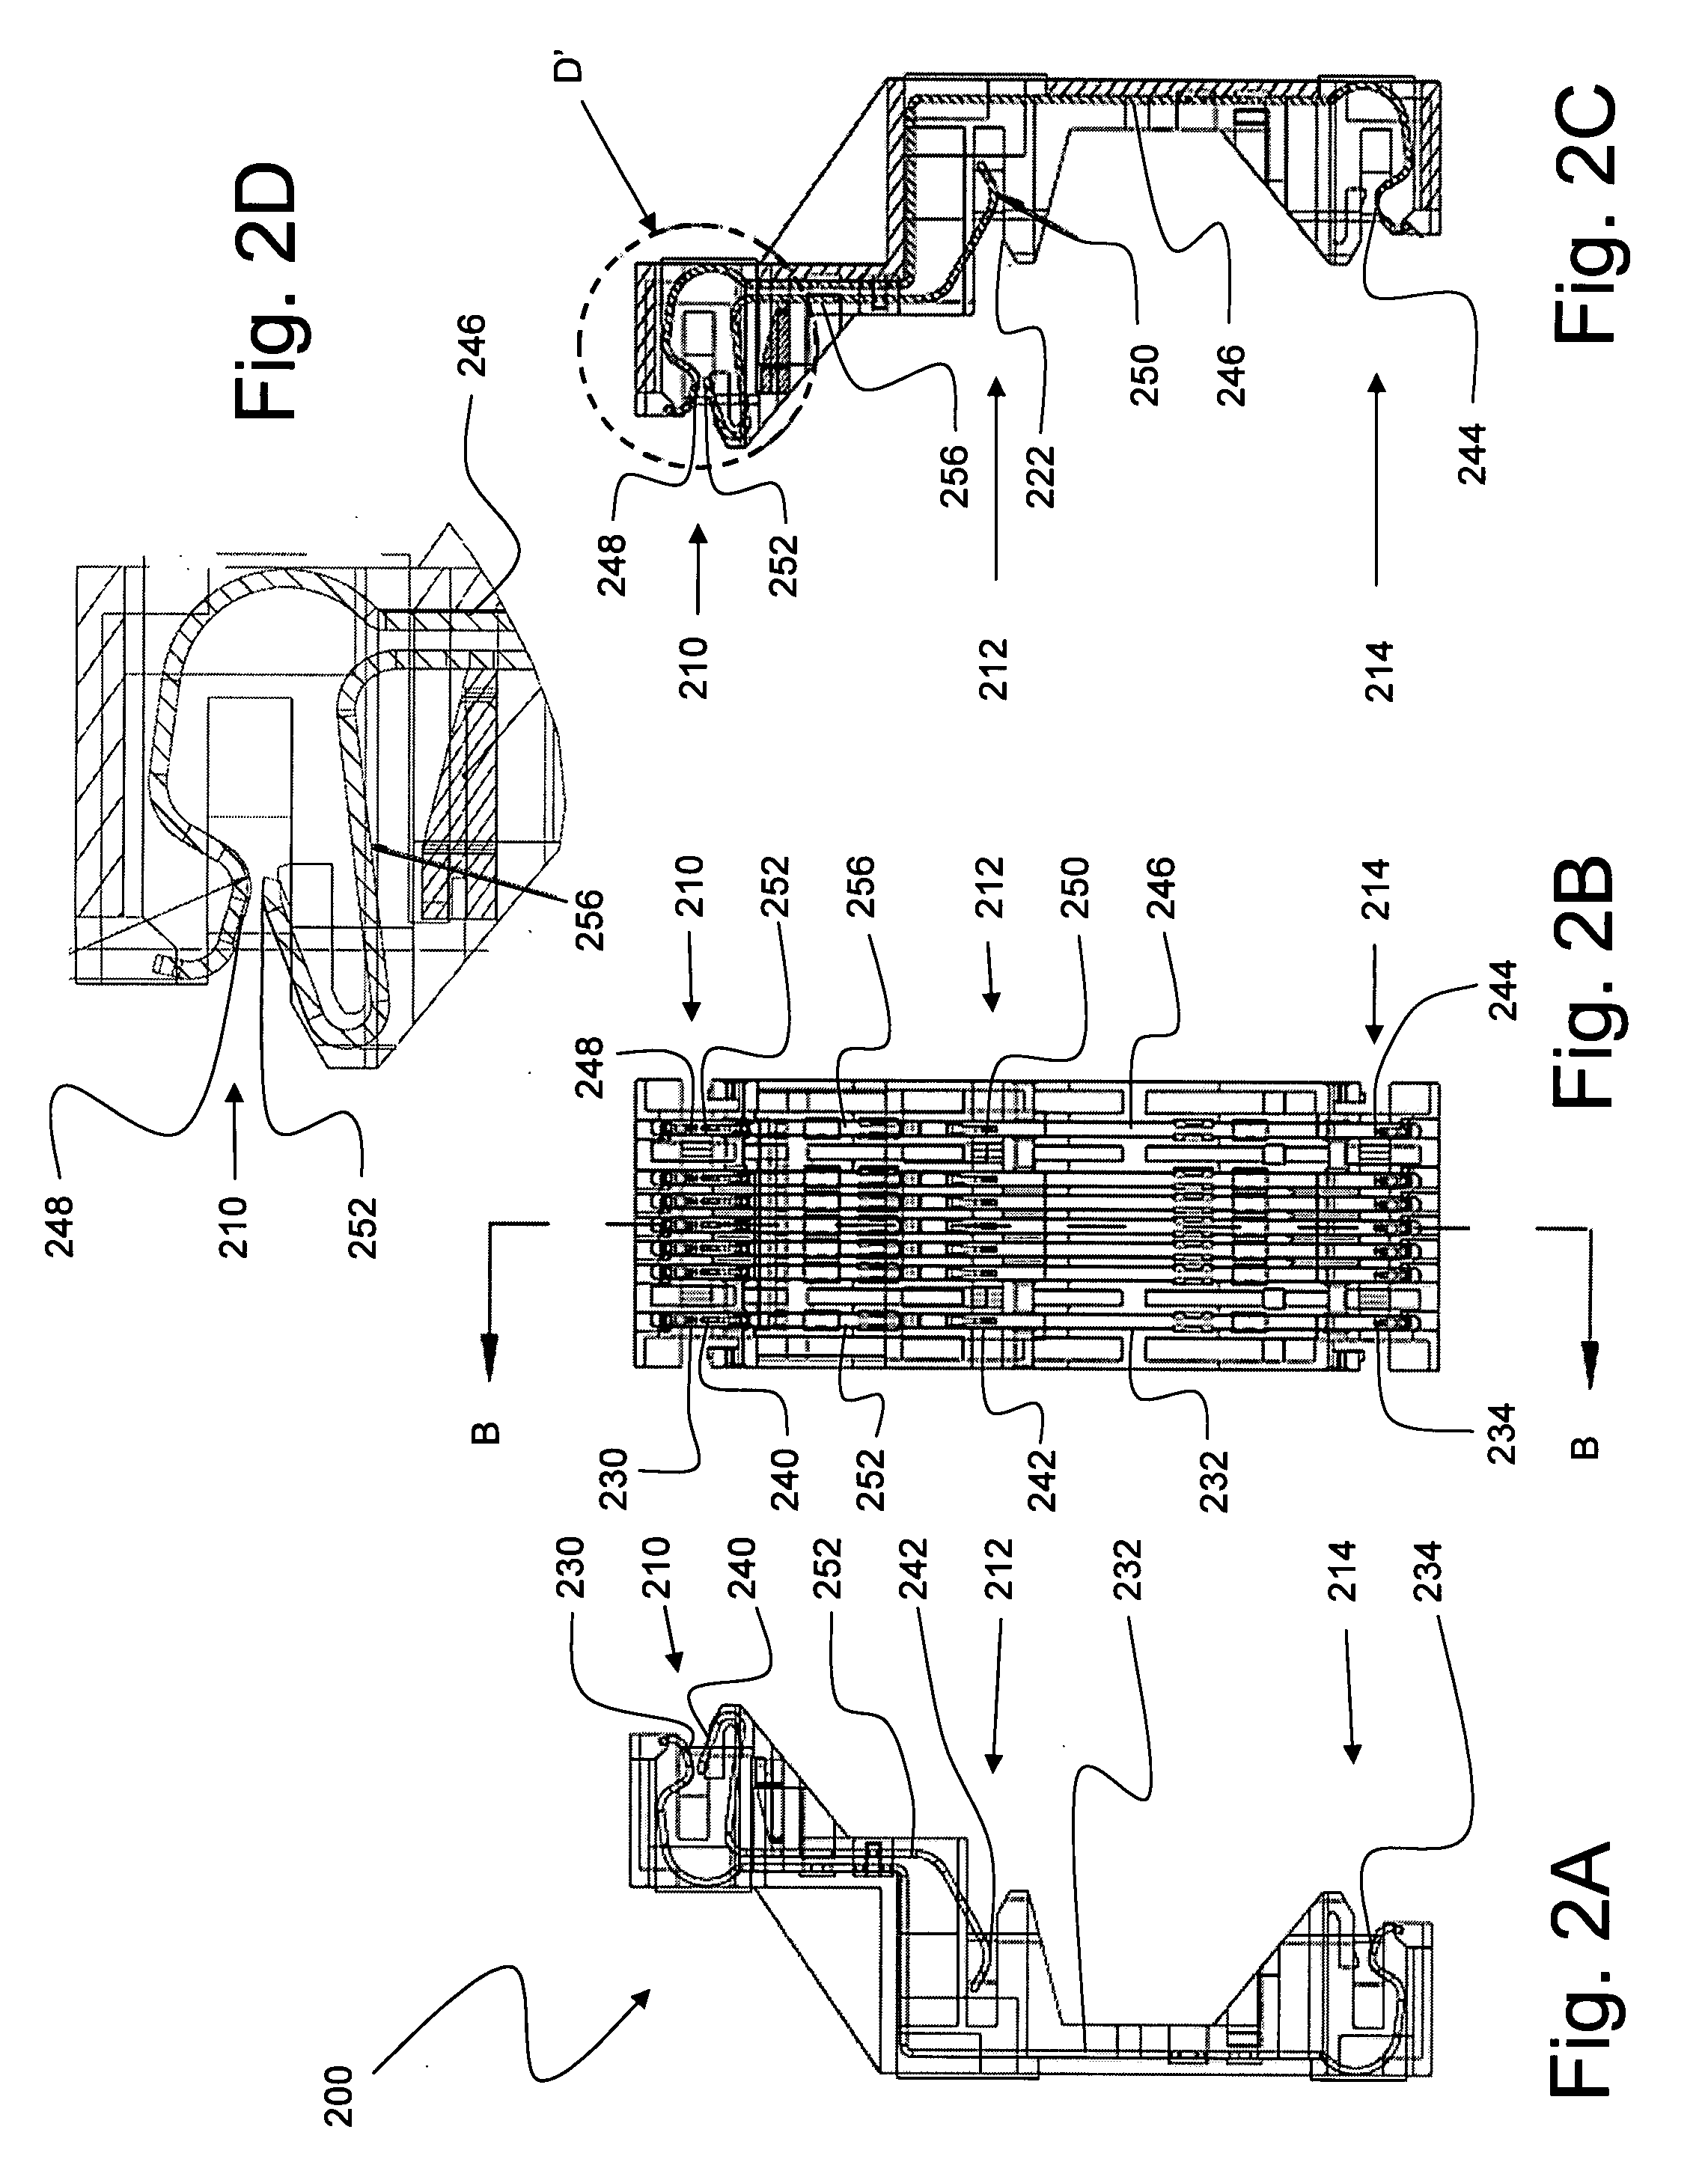 Printed circuit board connector for utility meters